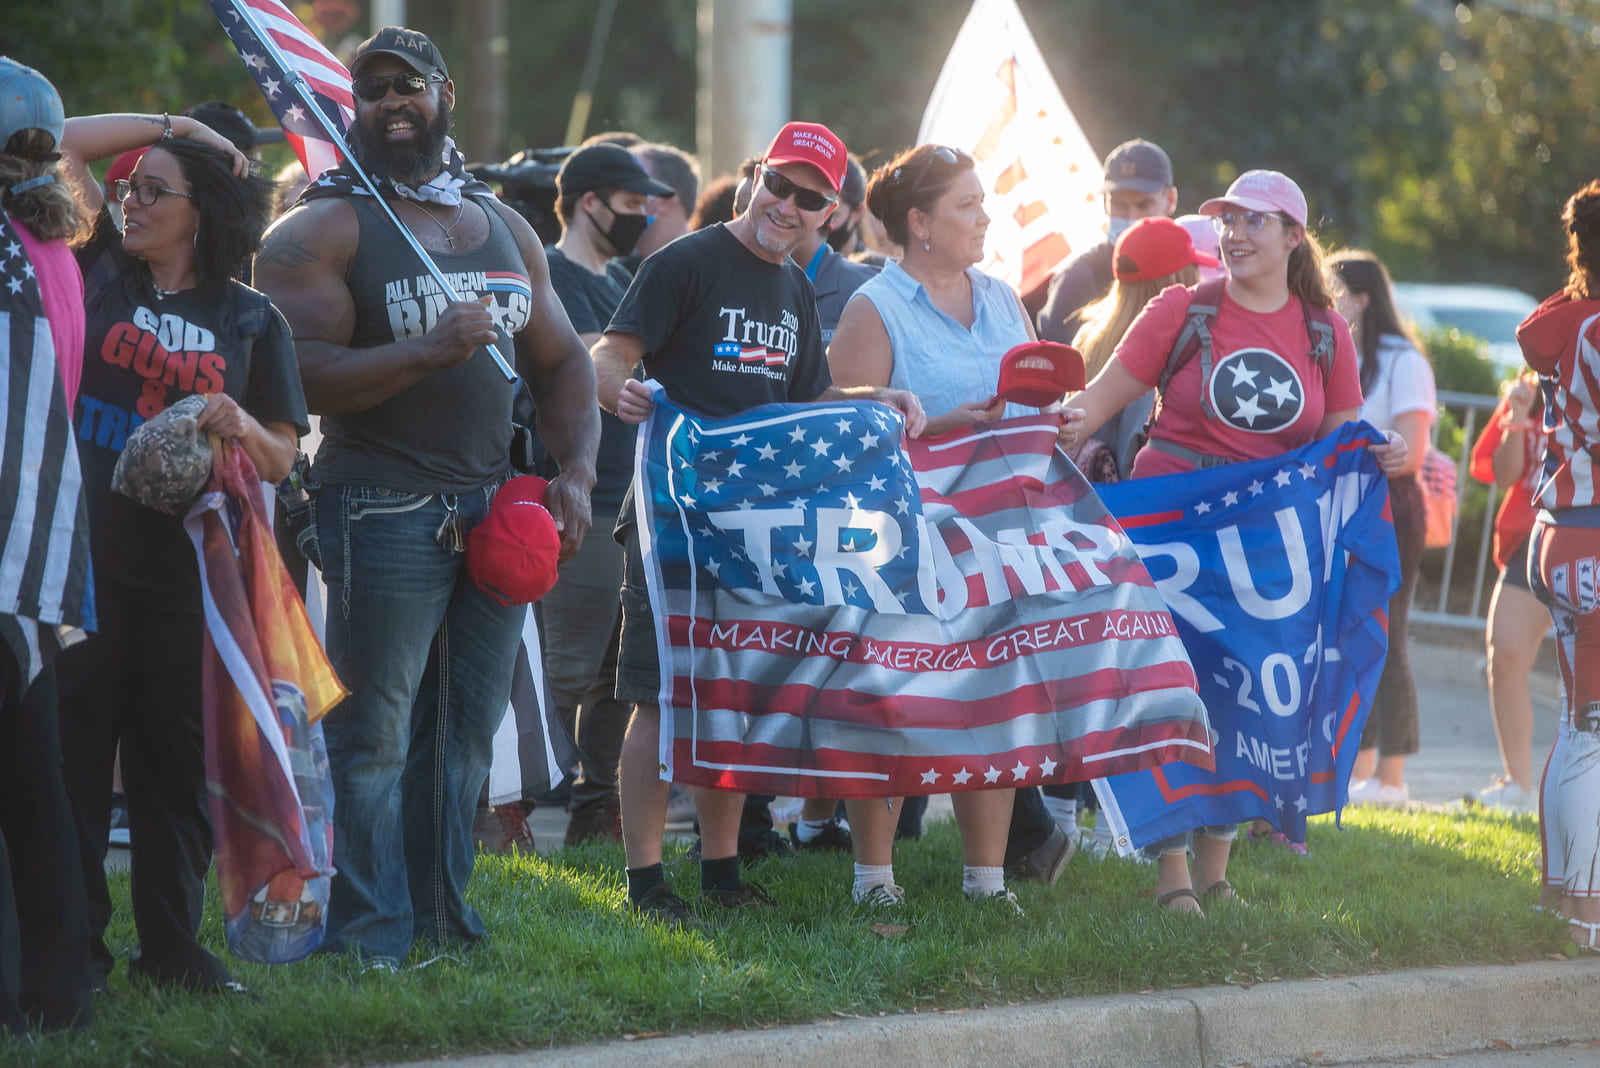 Trump supporters holding Trump supporting flags outside of Belmont University on day of debate